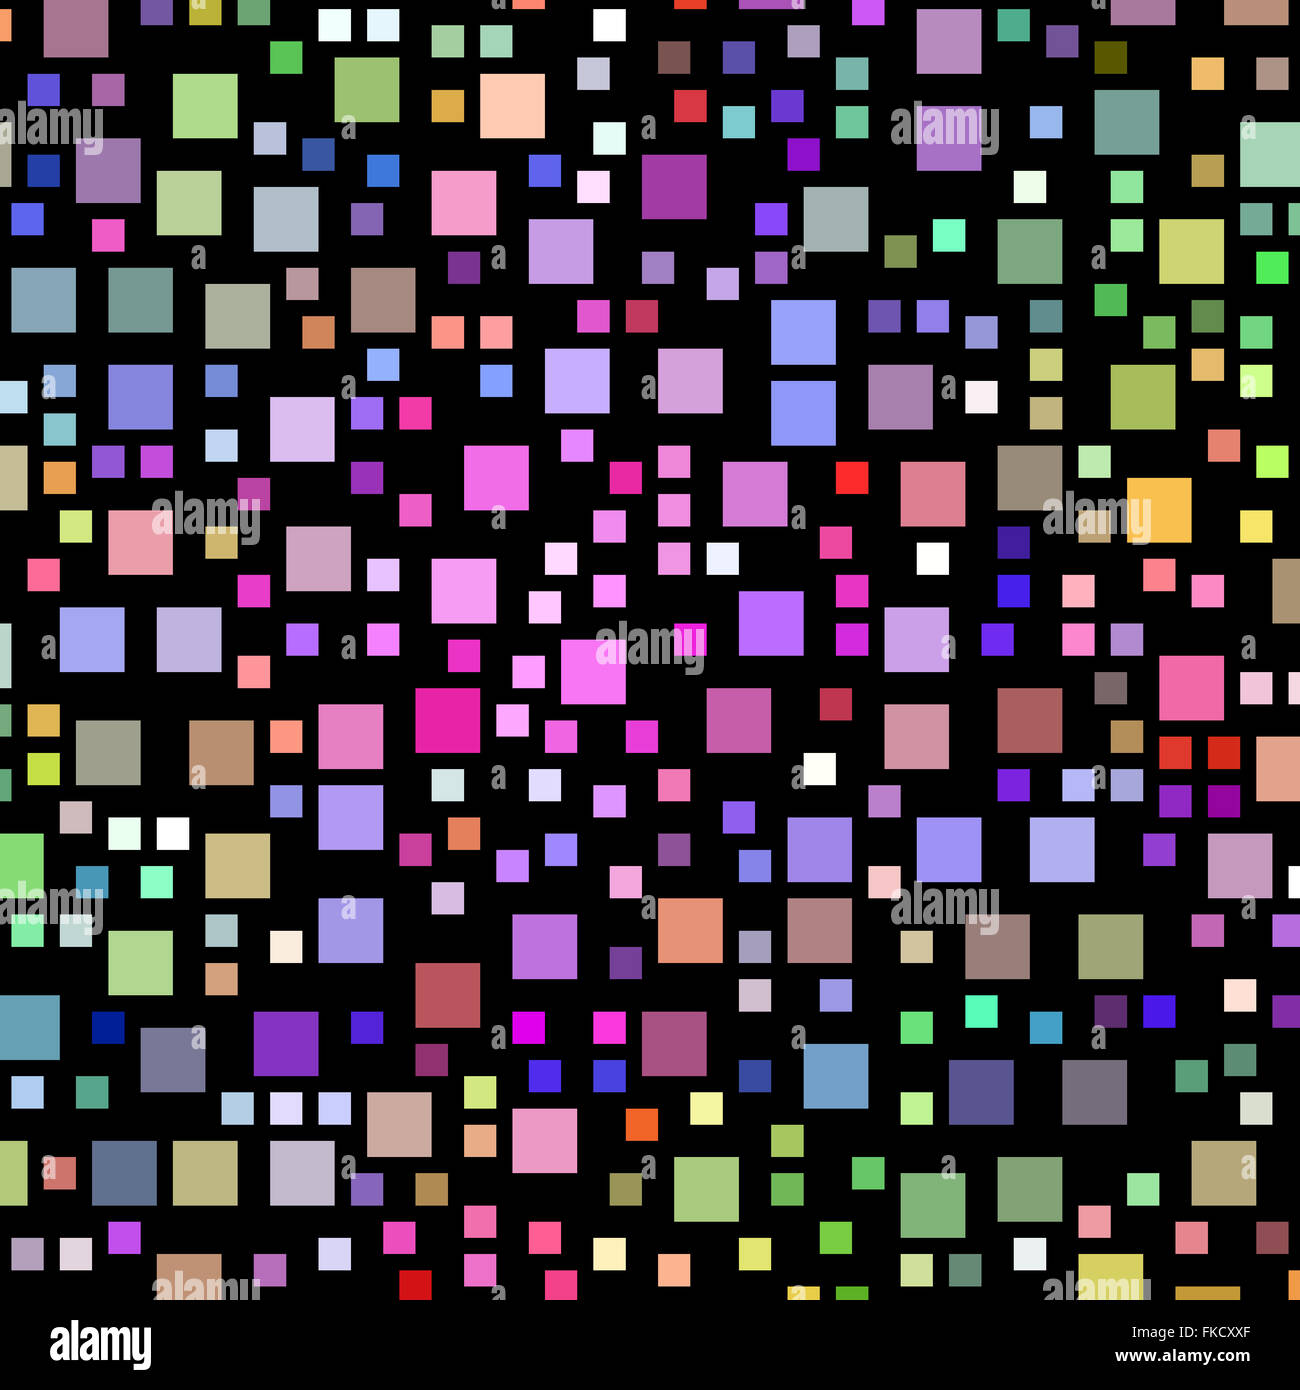 Lots of small colourful square shapes on a black background. Stock Photo